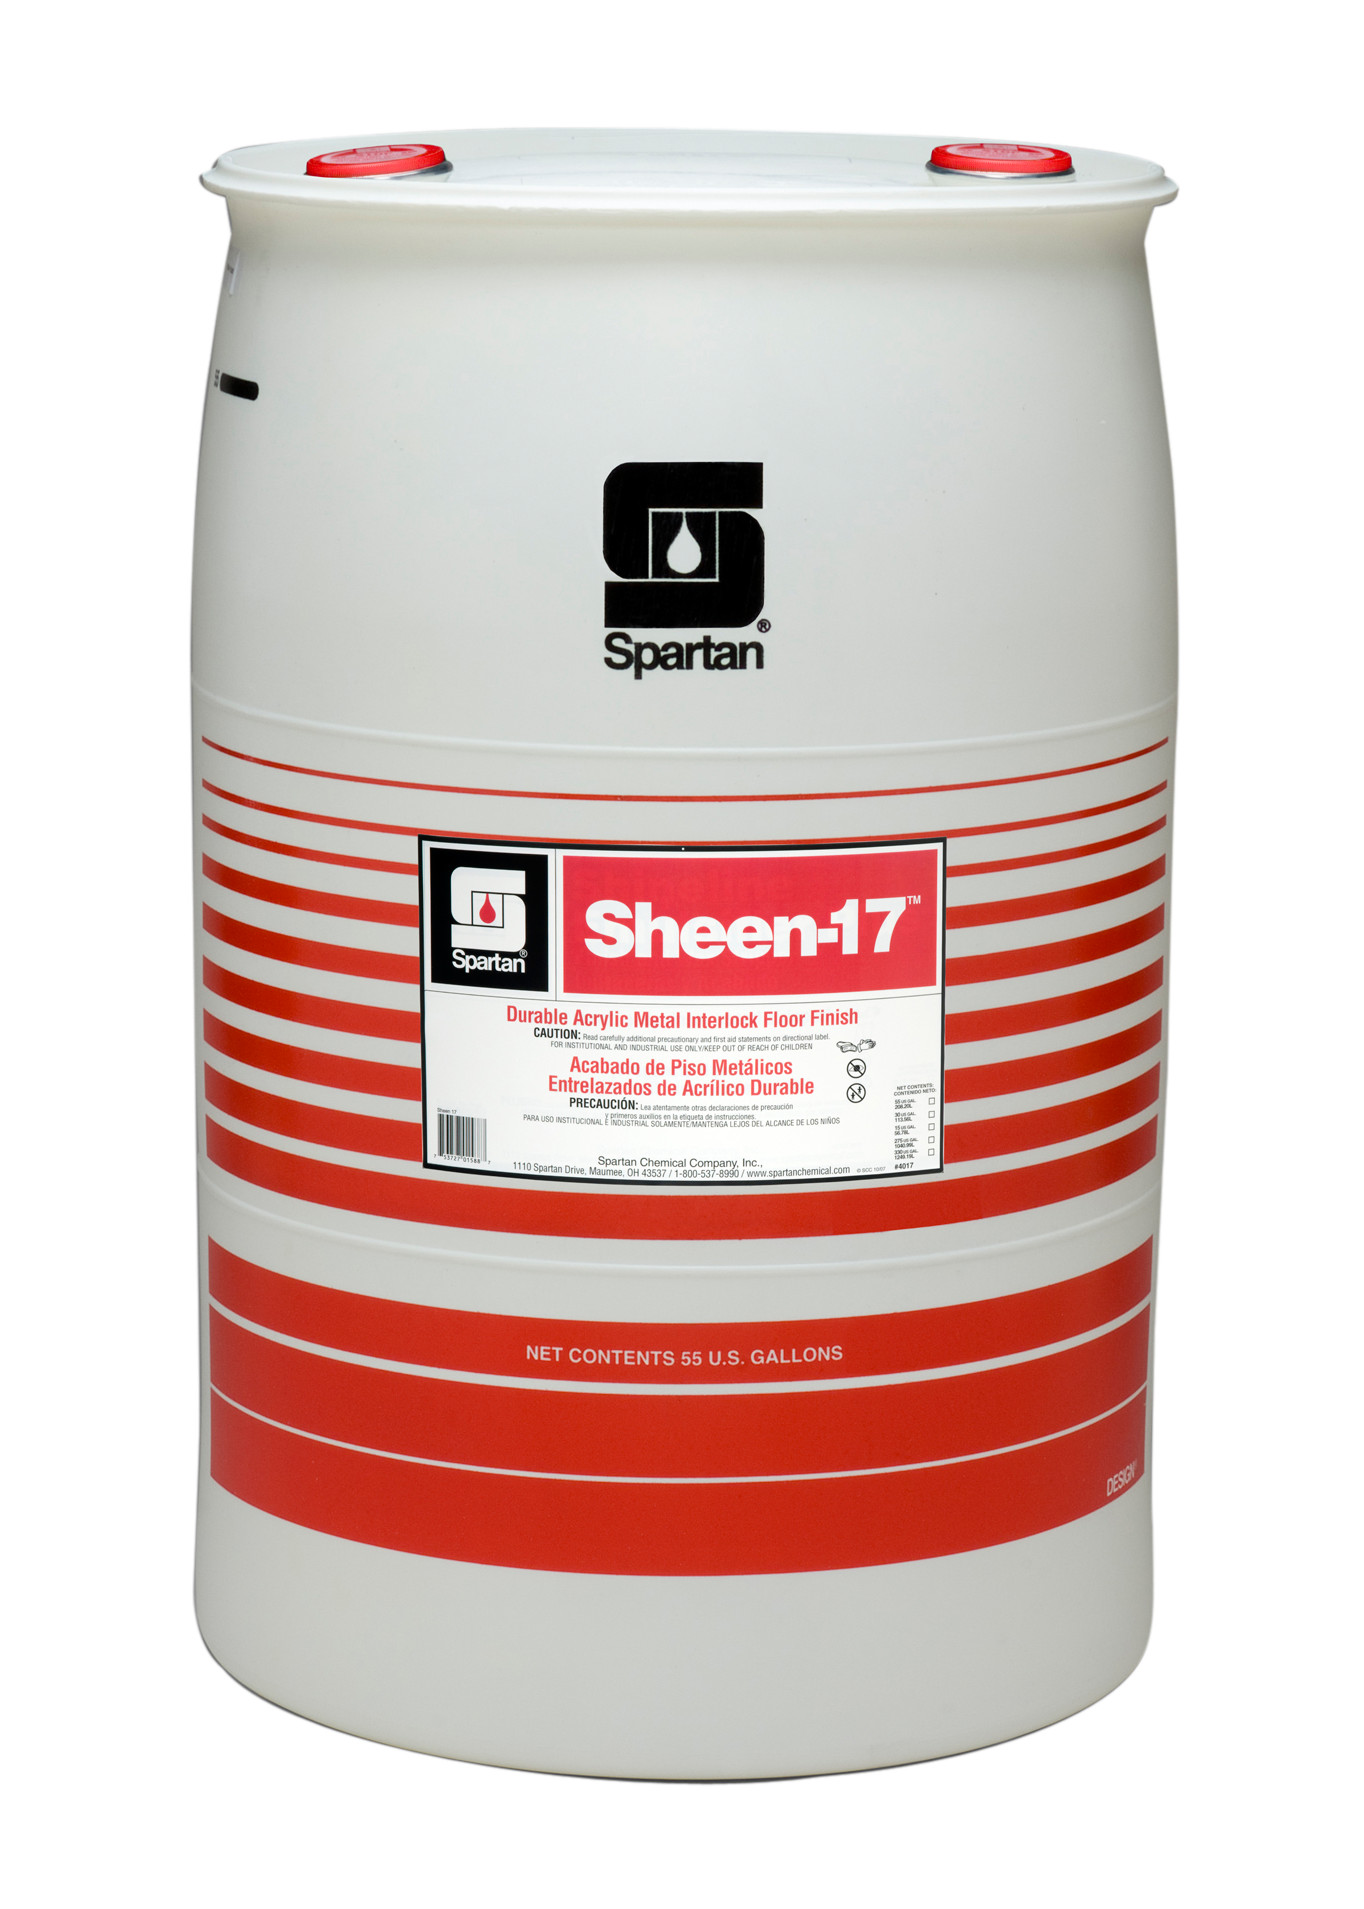 Spartan Chemical Company Sheen 17, 55 GAL DRUM